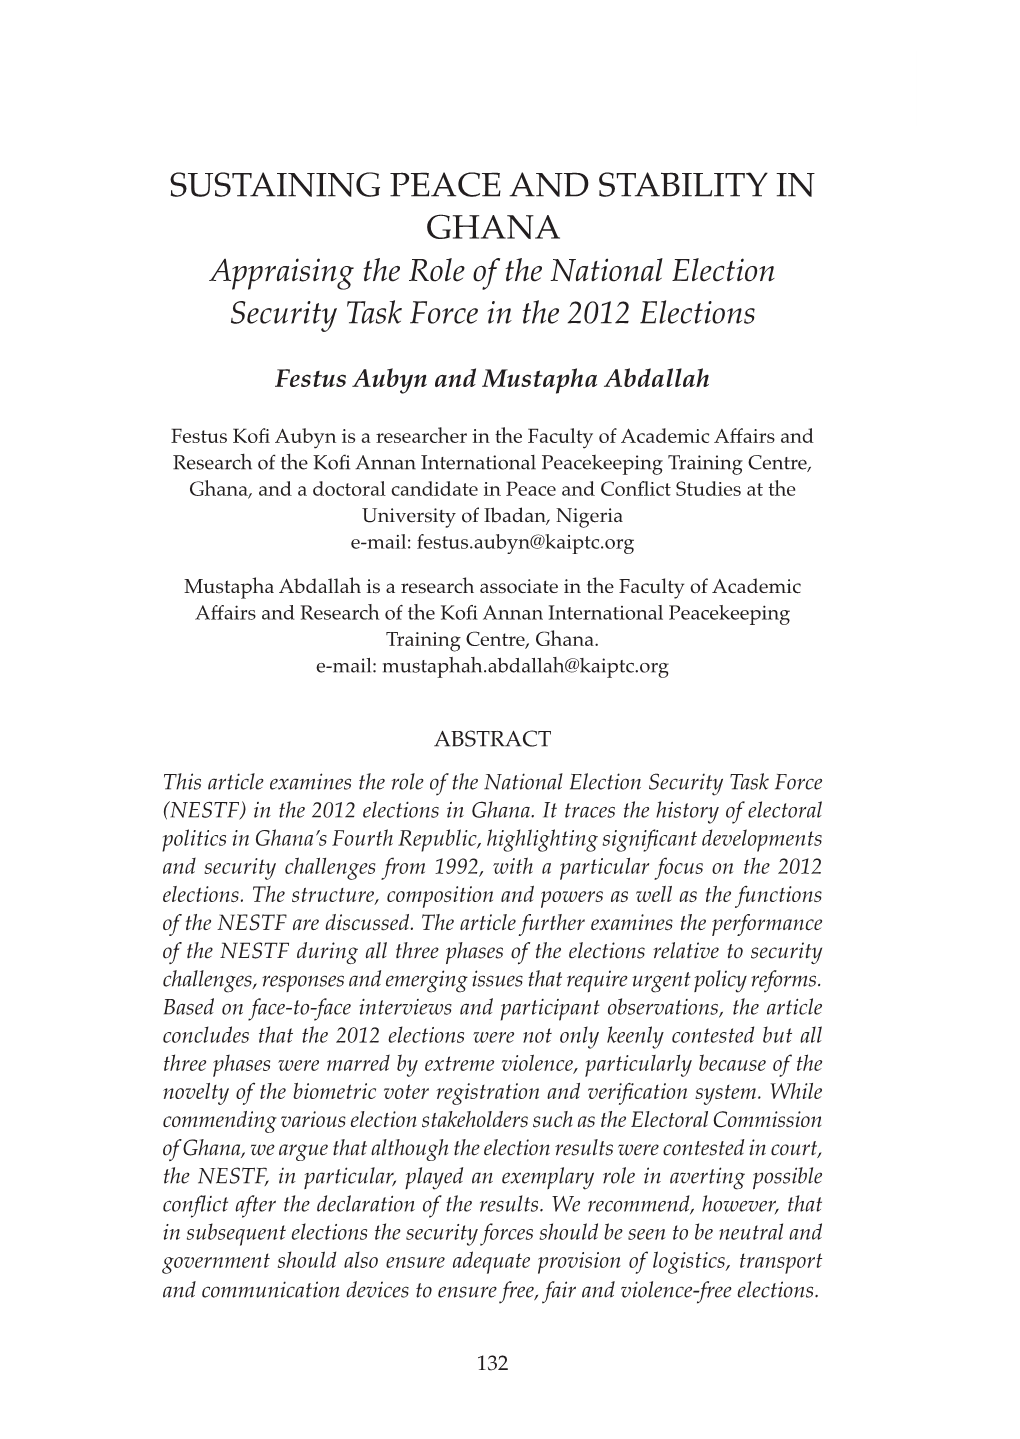 Sustaining Peace and Stability in Ghana Appraising the Role of the National Election Security Task Force in the 2012 Elections